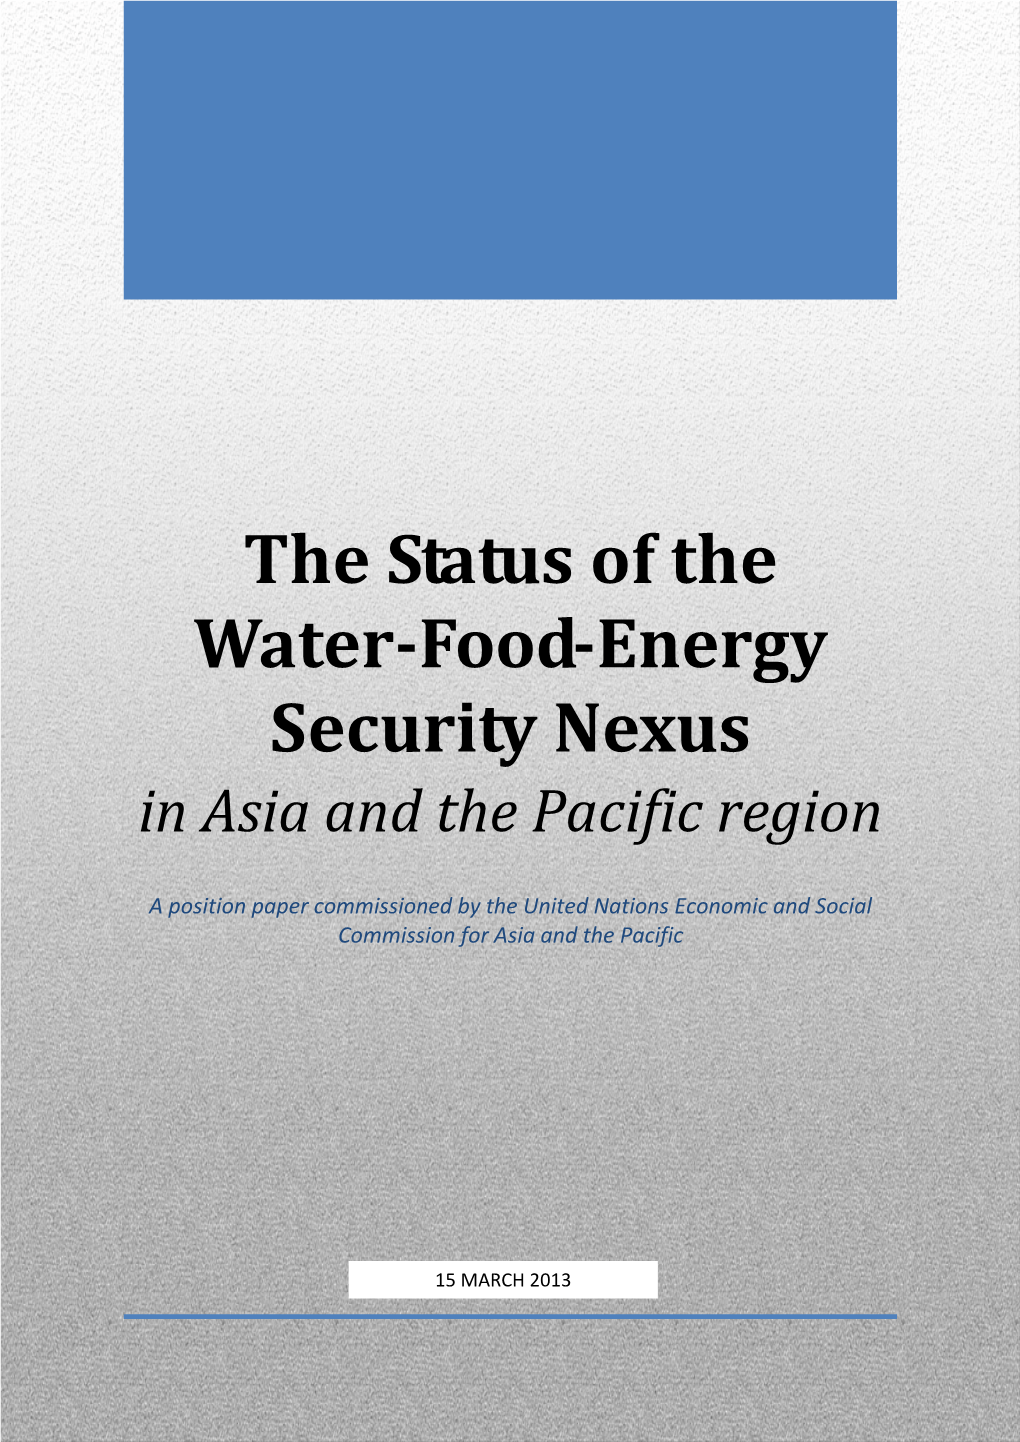 The Status of the Water-Food-Energy Security Nexus in Asia and the Pacific Region